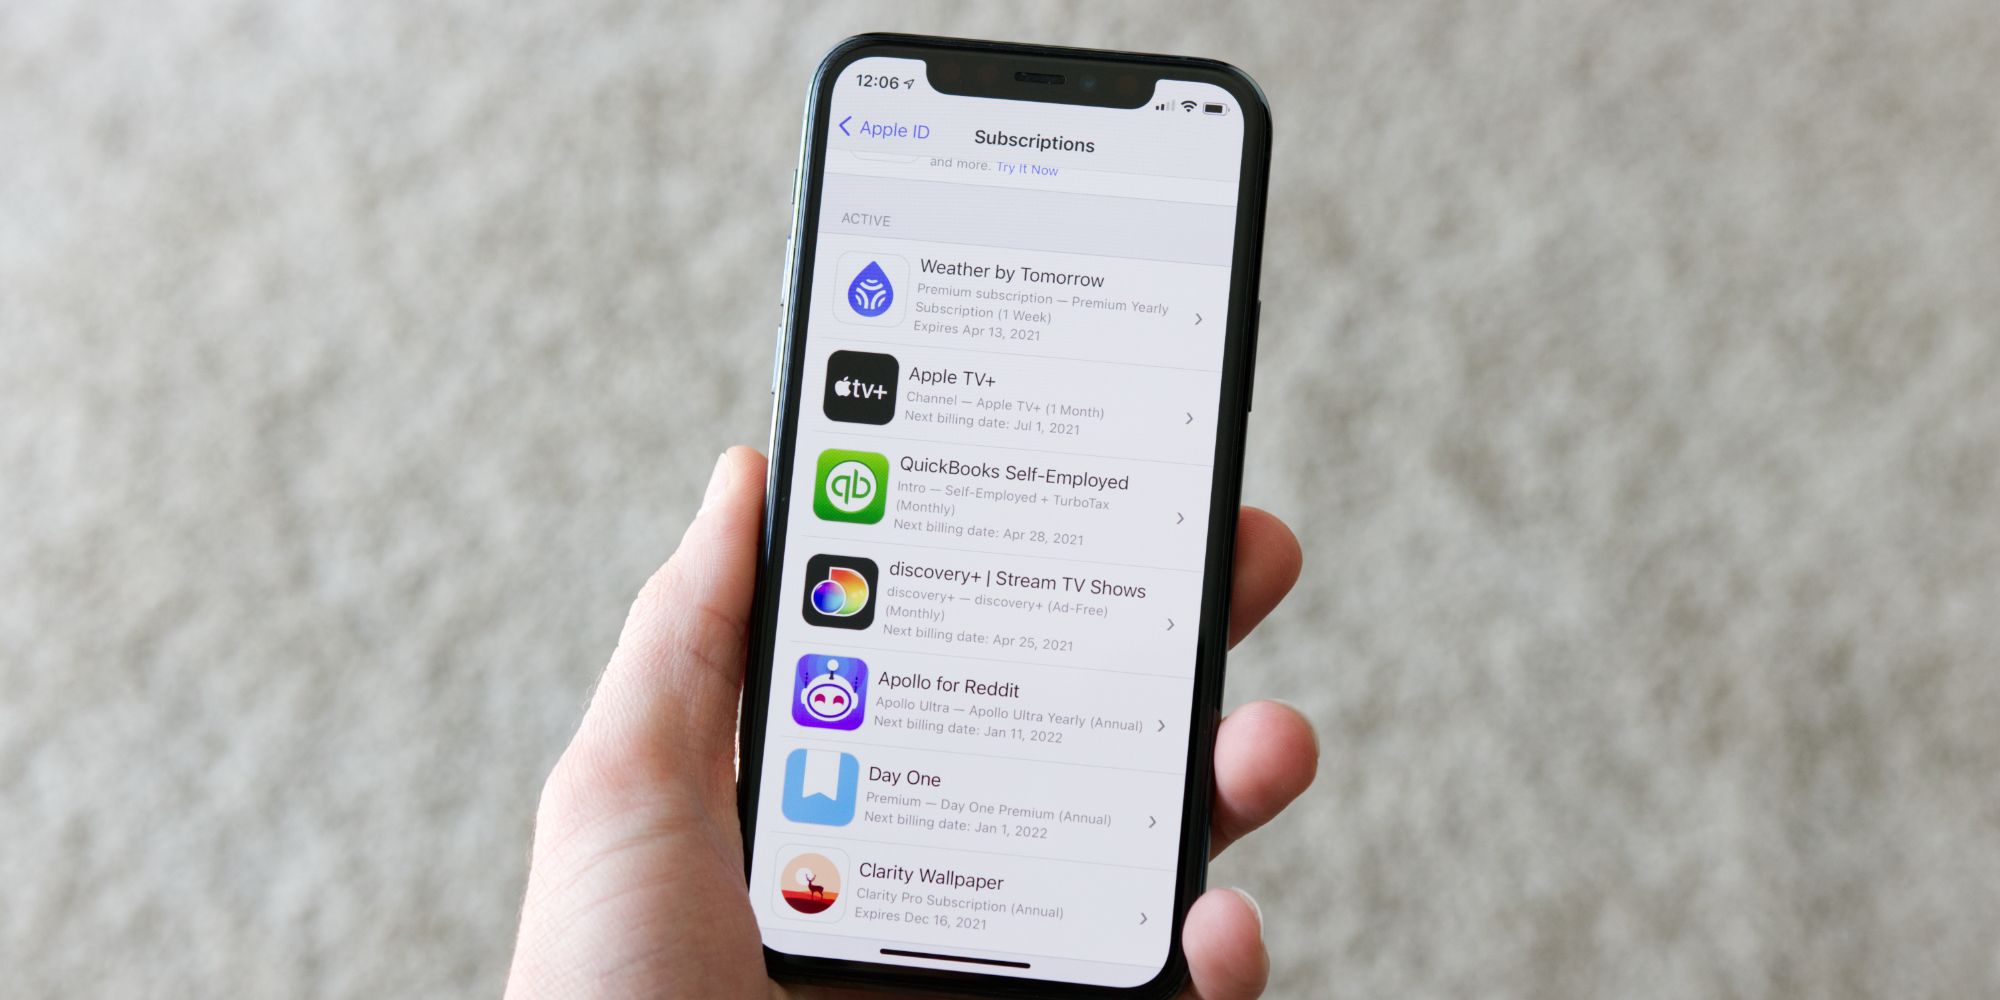 App subscriptions on an iPhone